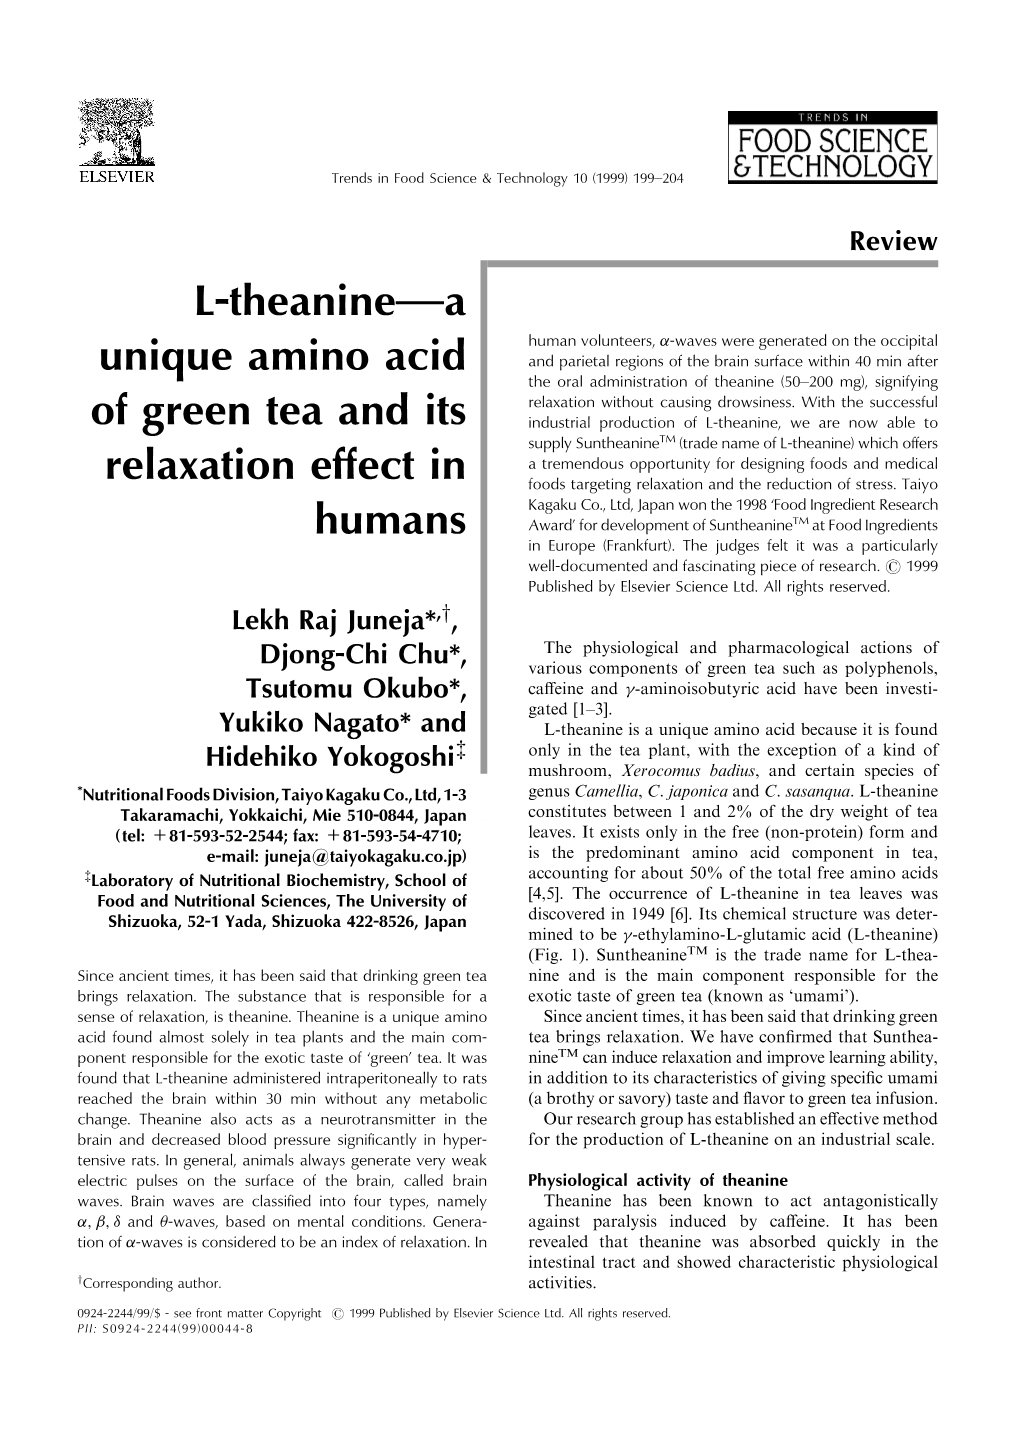 L-Theanineða Unique Amino Acid of Green Tea and Its Relaxation E€Ect In